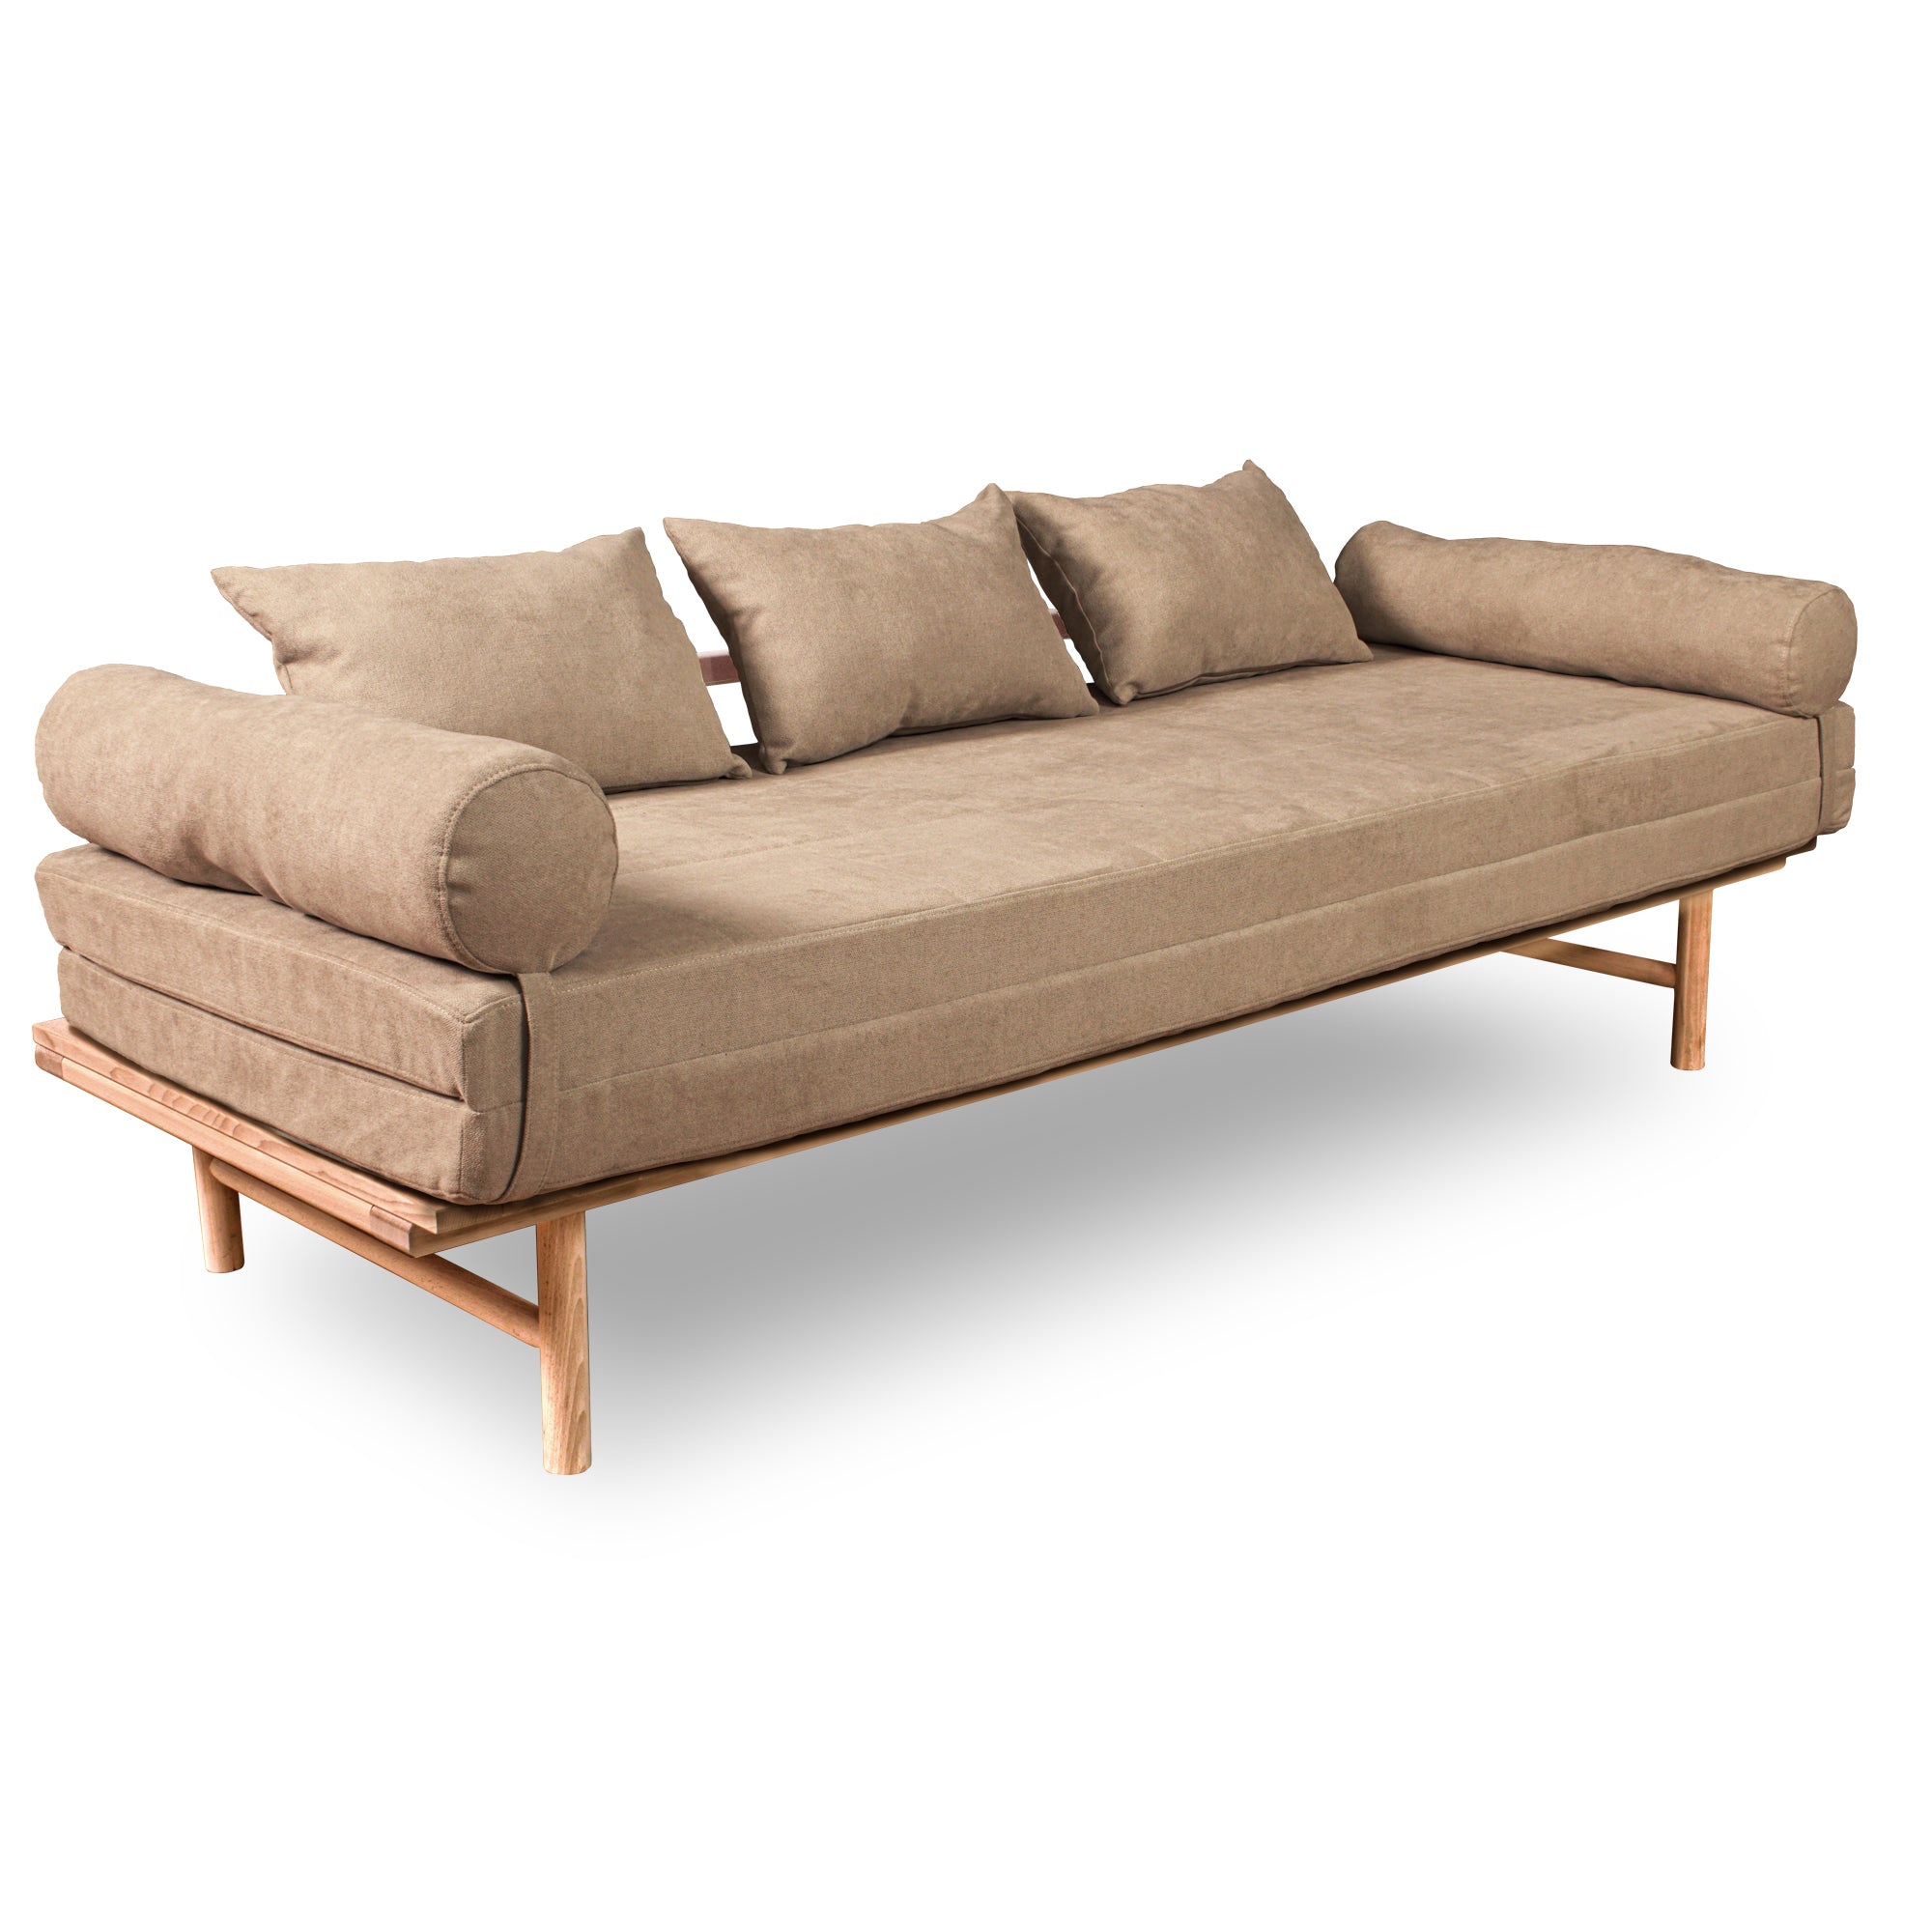 Le MAR Folding Daybed, Beech Wood Frame, Natural Colour-upholstery beige